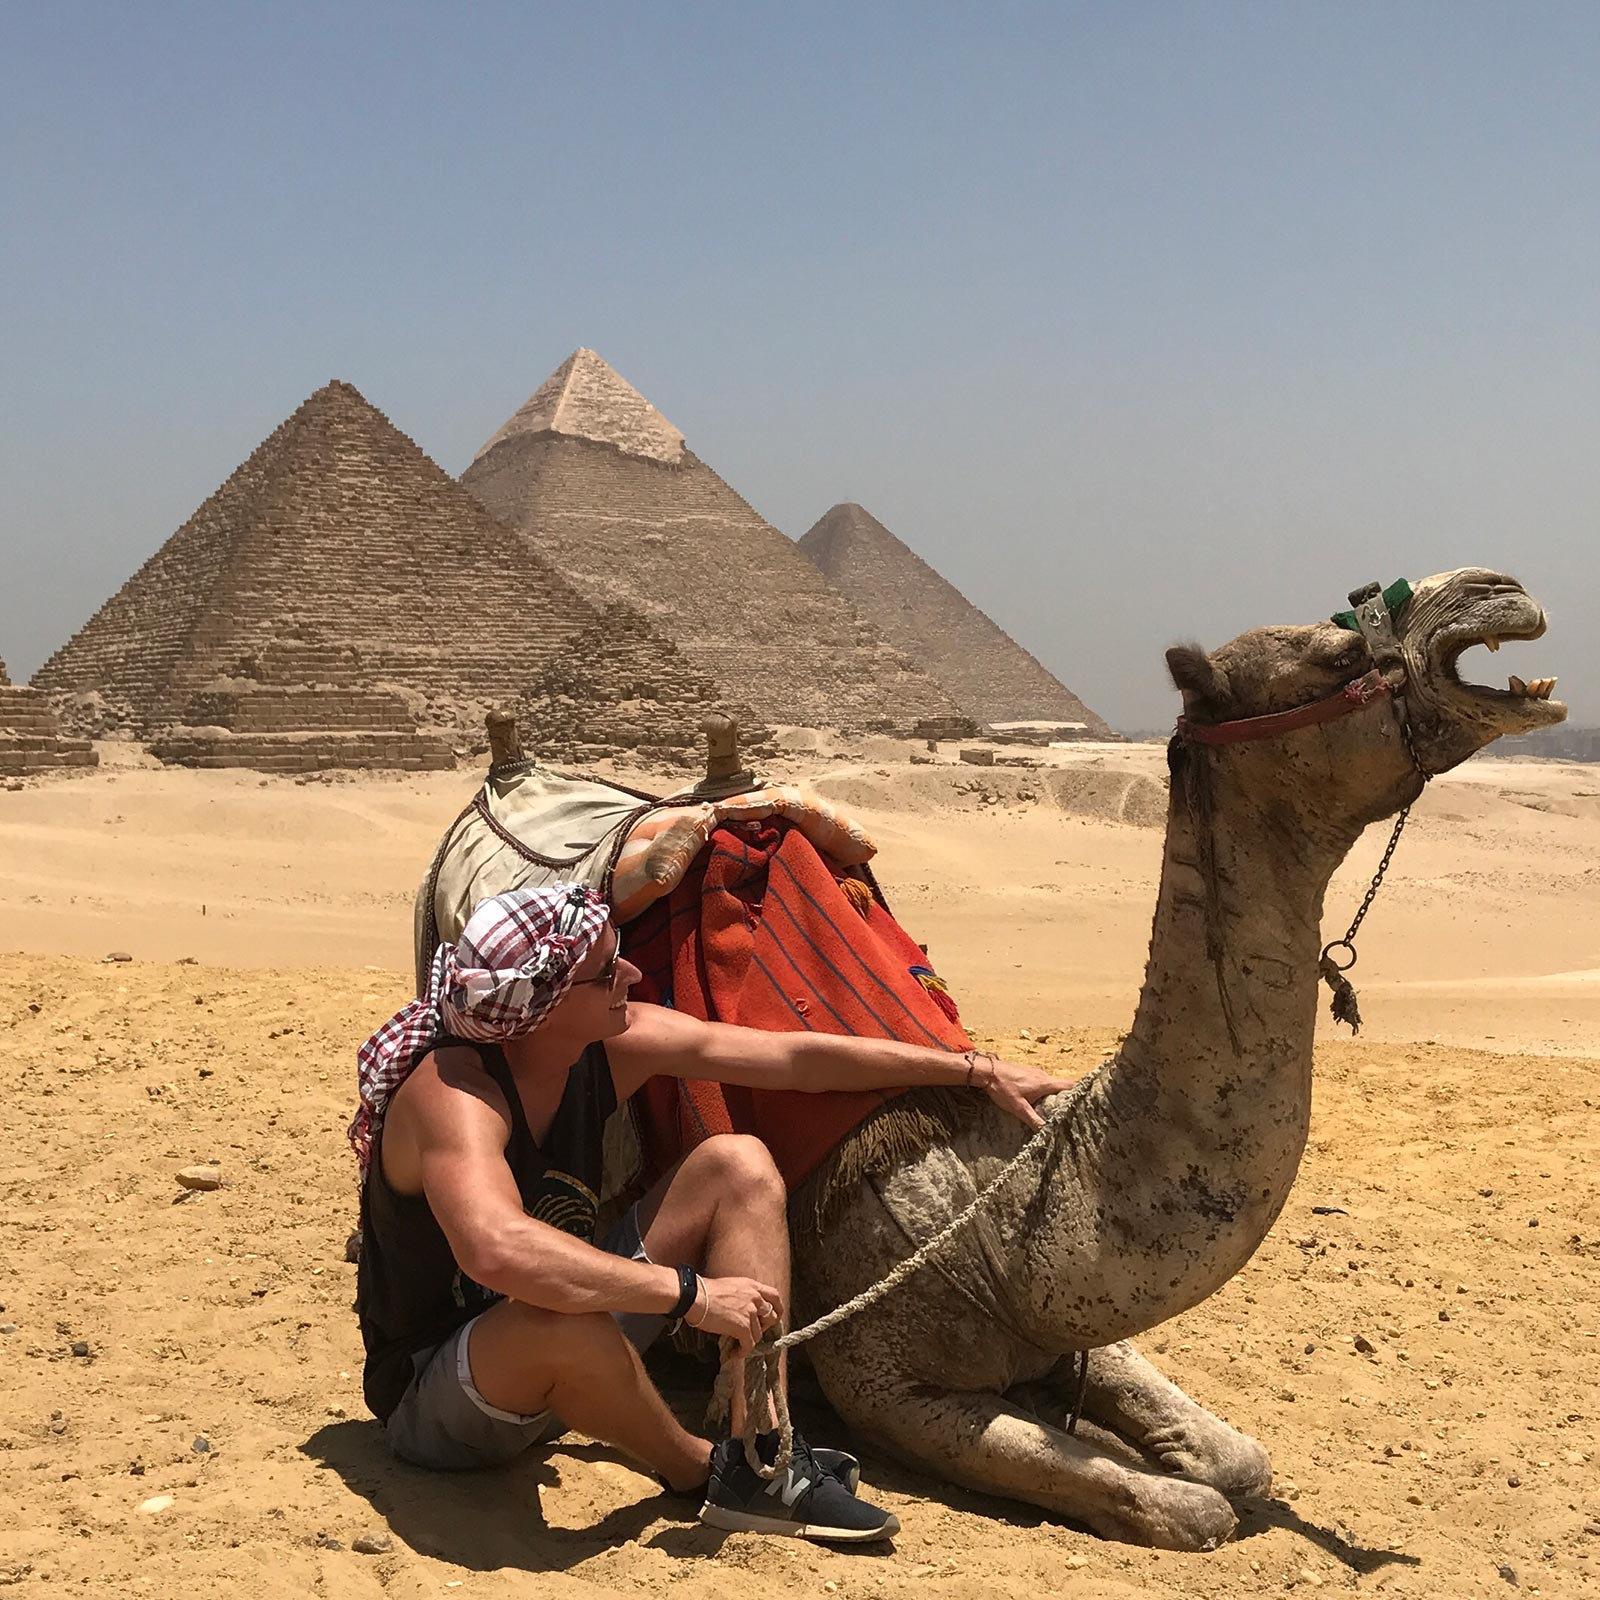 David Simpson and camel resting on the ground at the pyramids in Cairo, Egypt. Getting inside the Ancient Pyramids of Giza